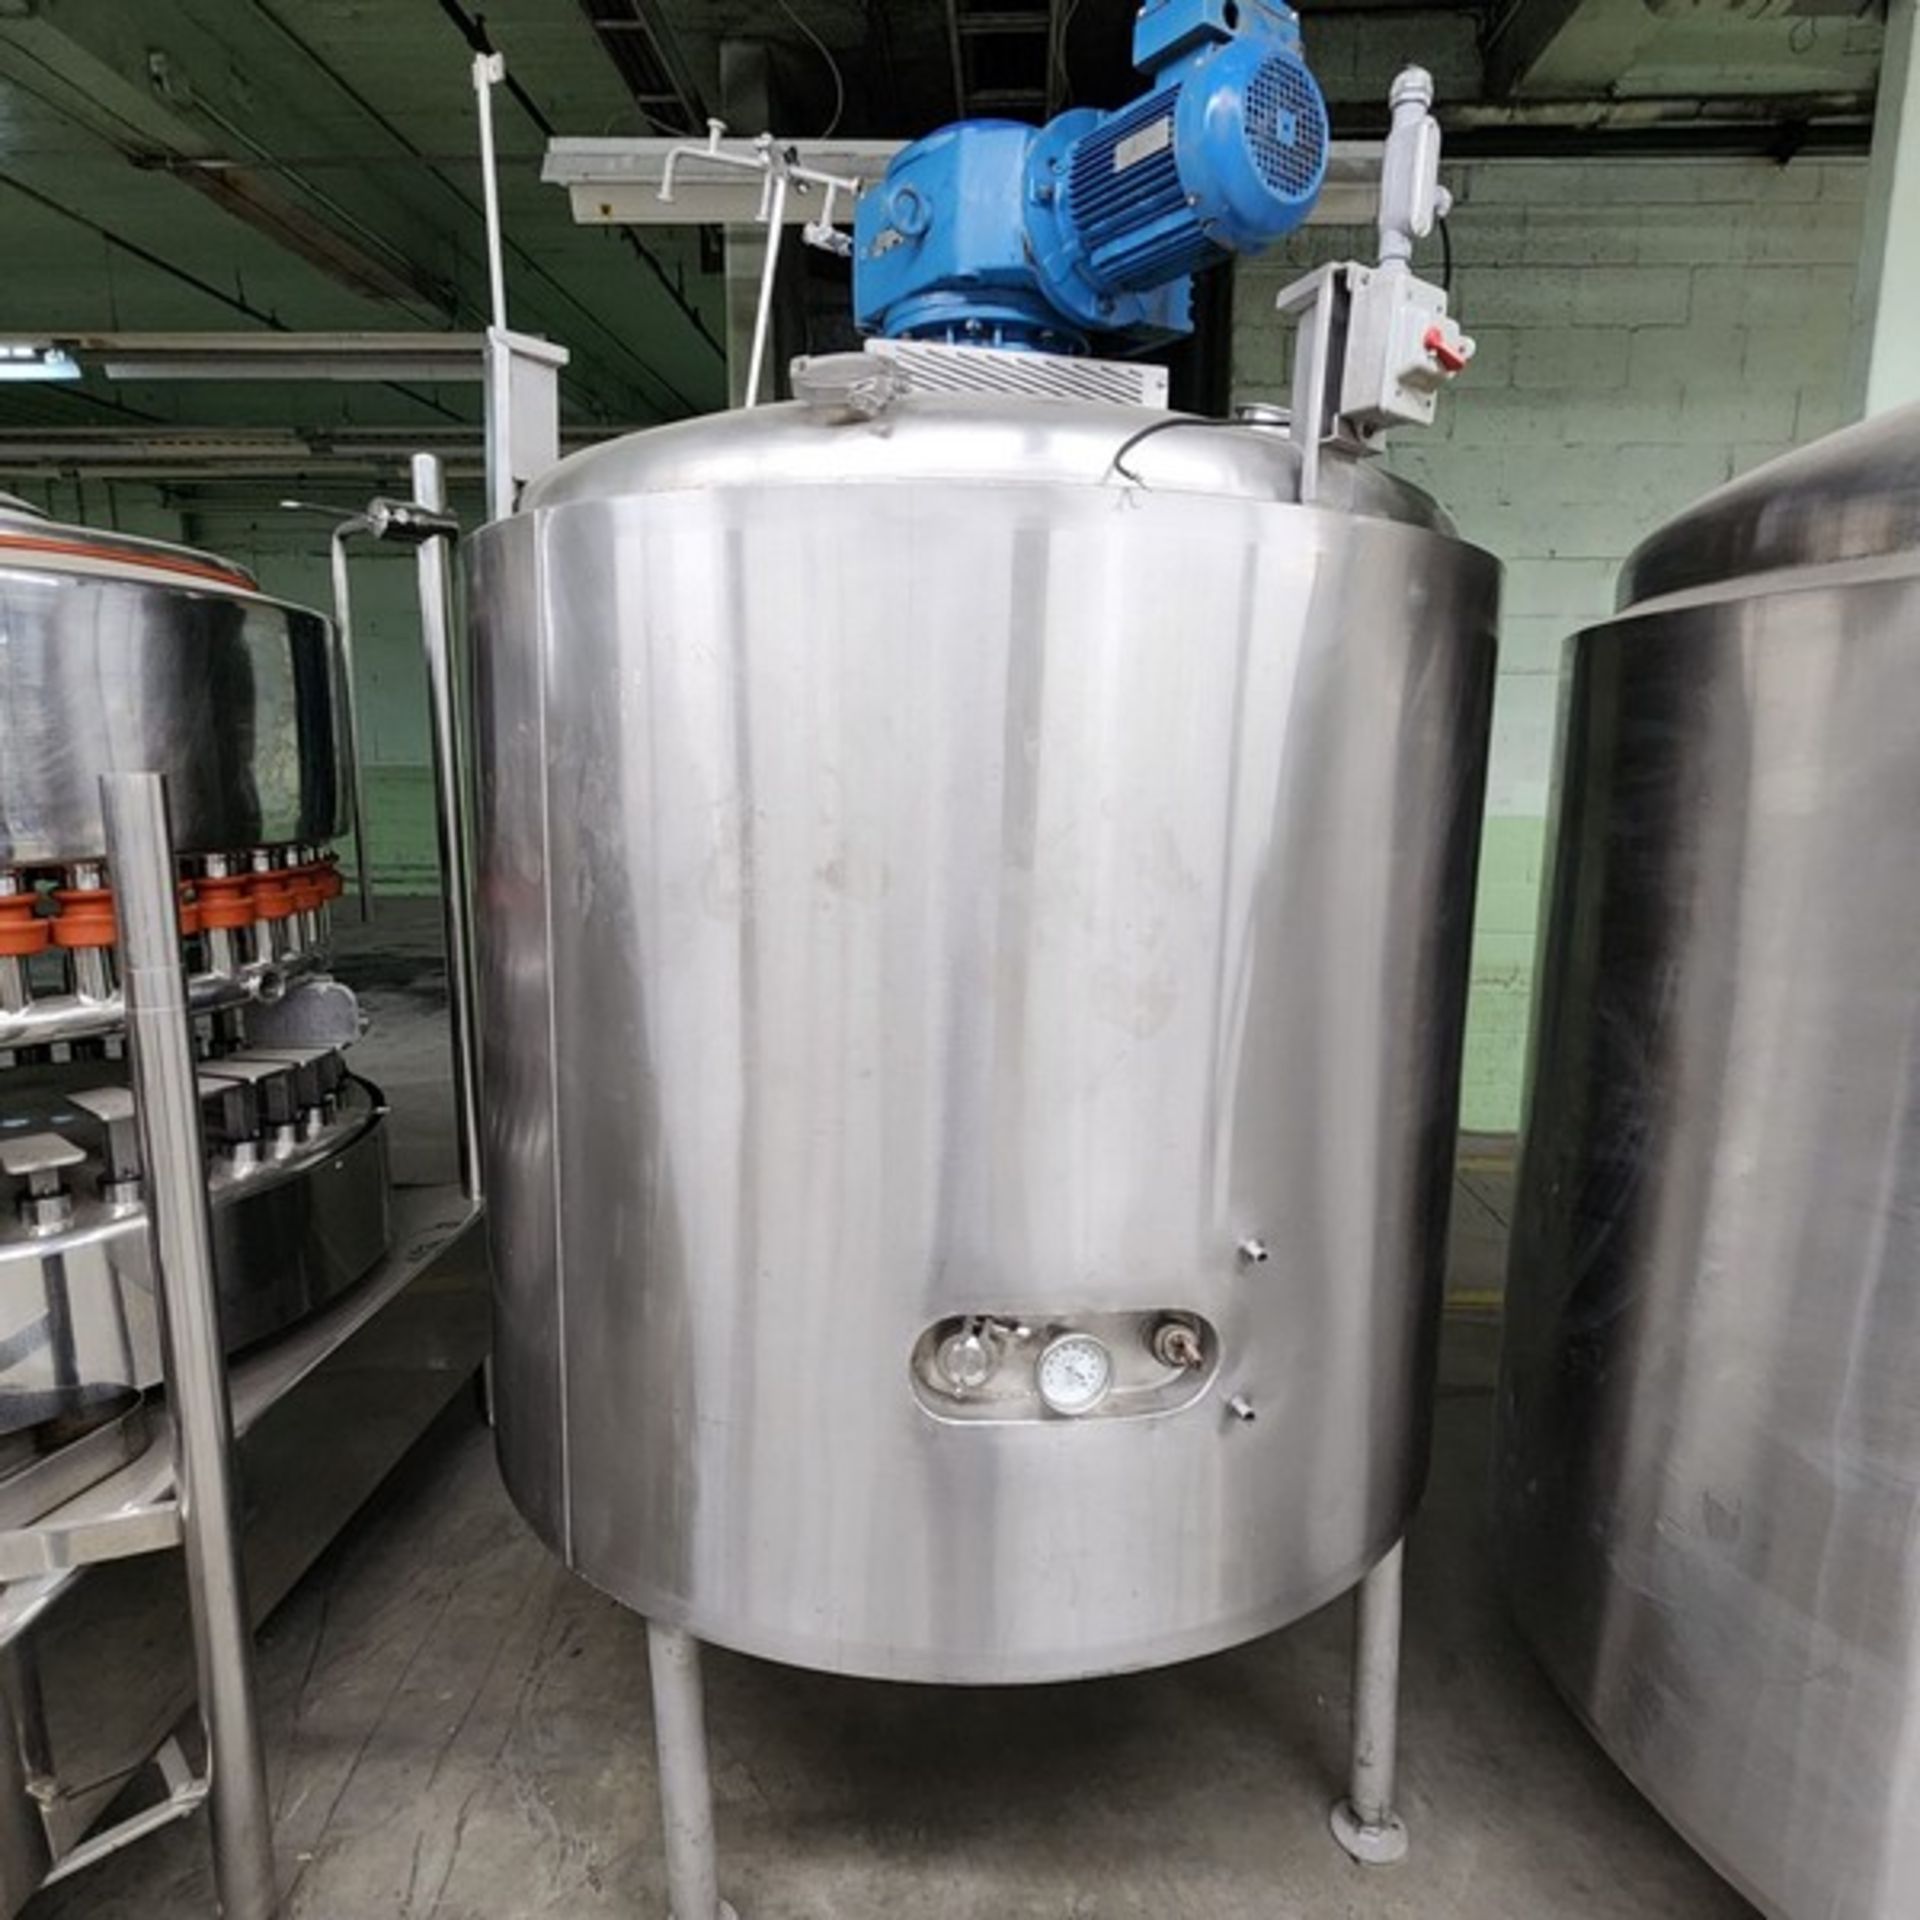 Cooling mixing tank mixer 230-460 volts 3 phase 316 Stainless Steel 500 gallons (Loading Fee $